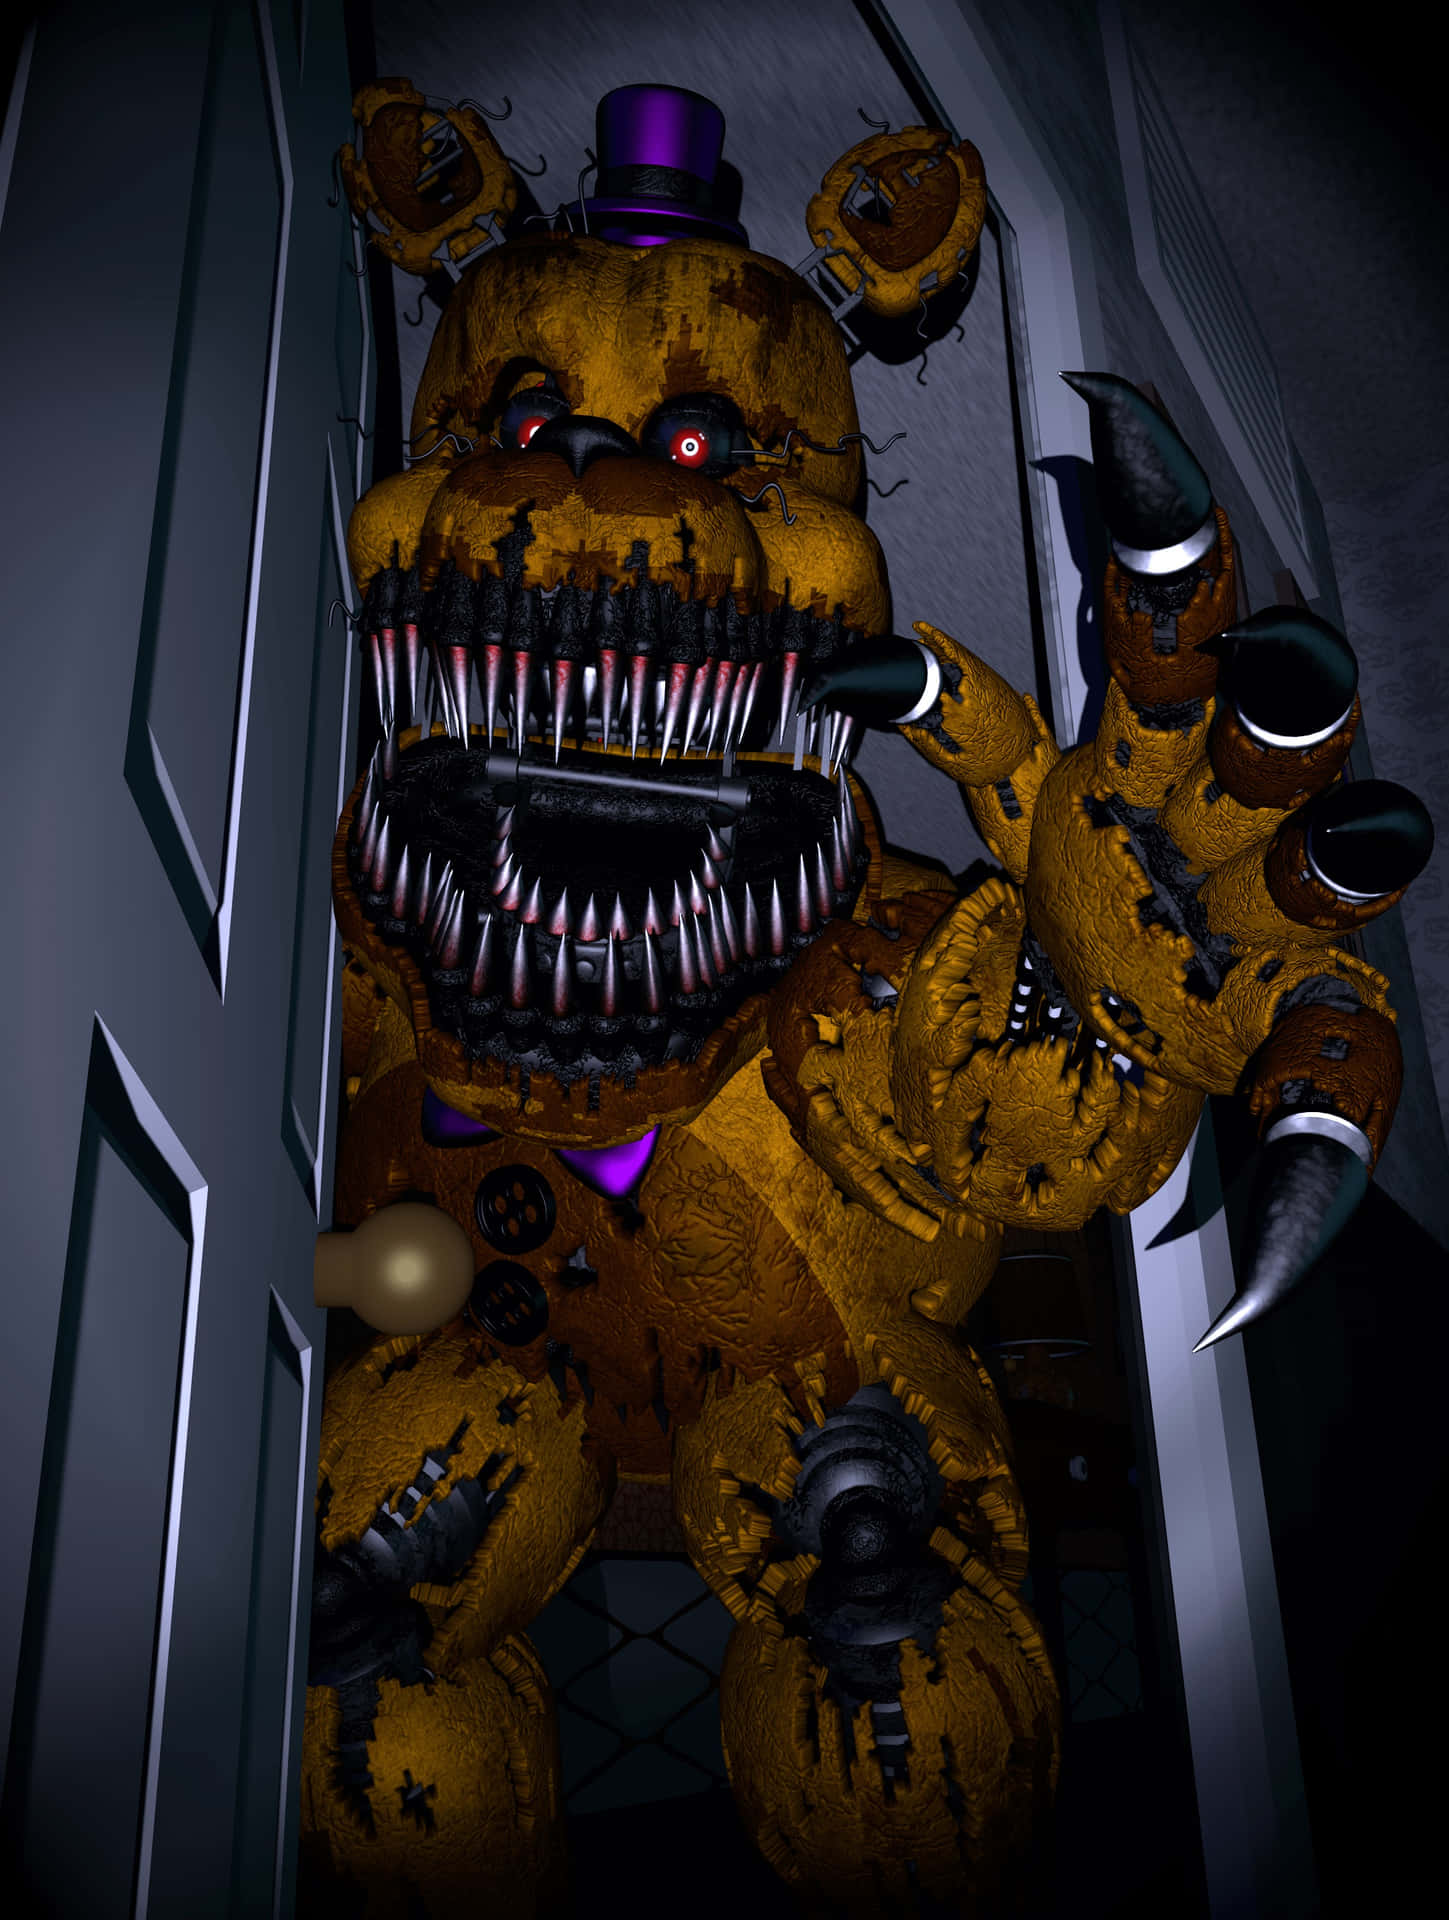 The Creepy World of Five Nights at Freddy's Wallpaper